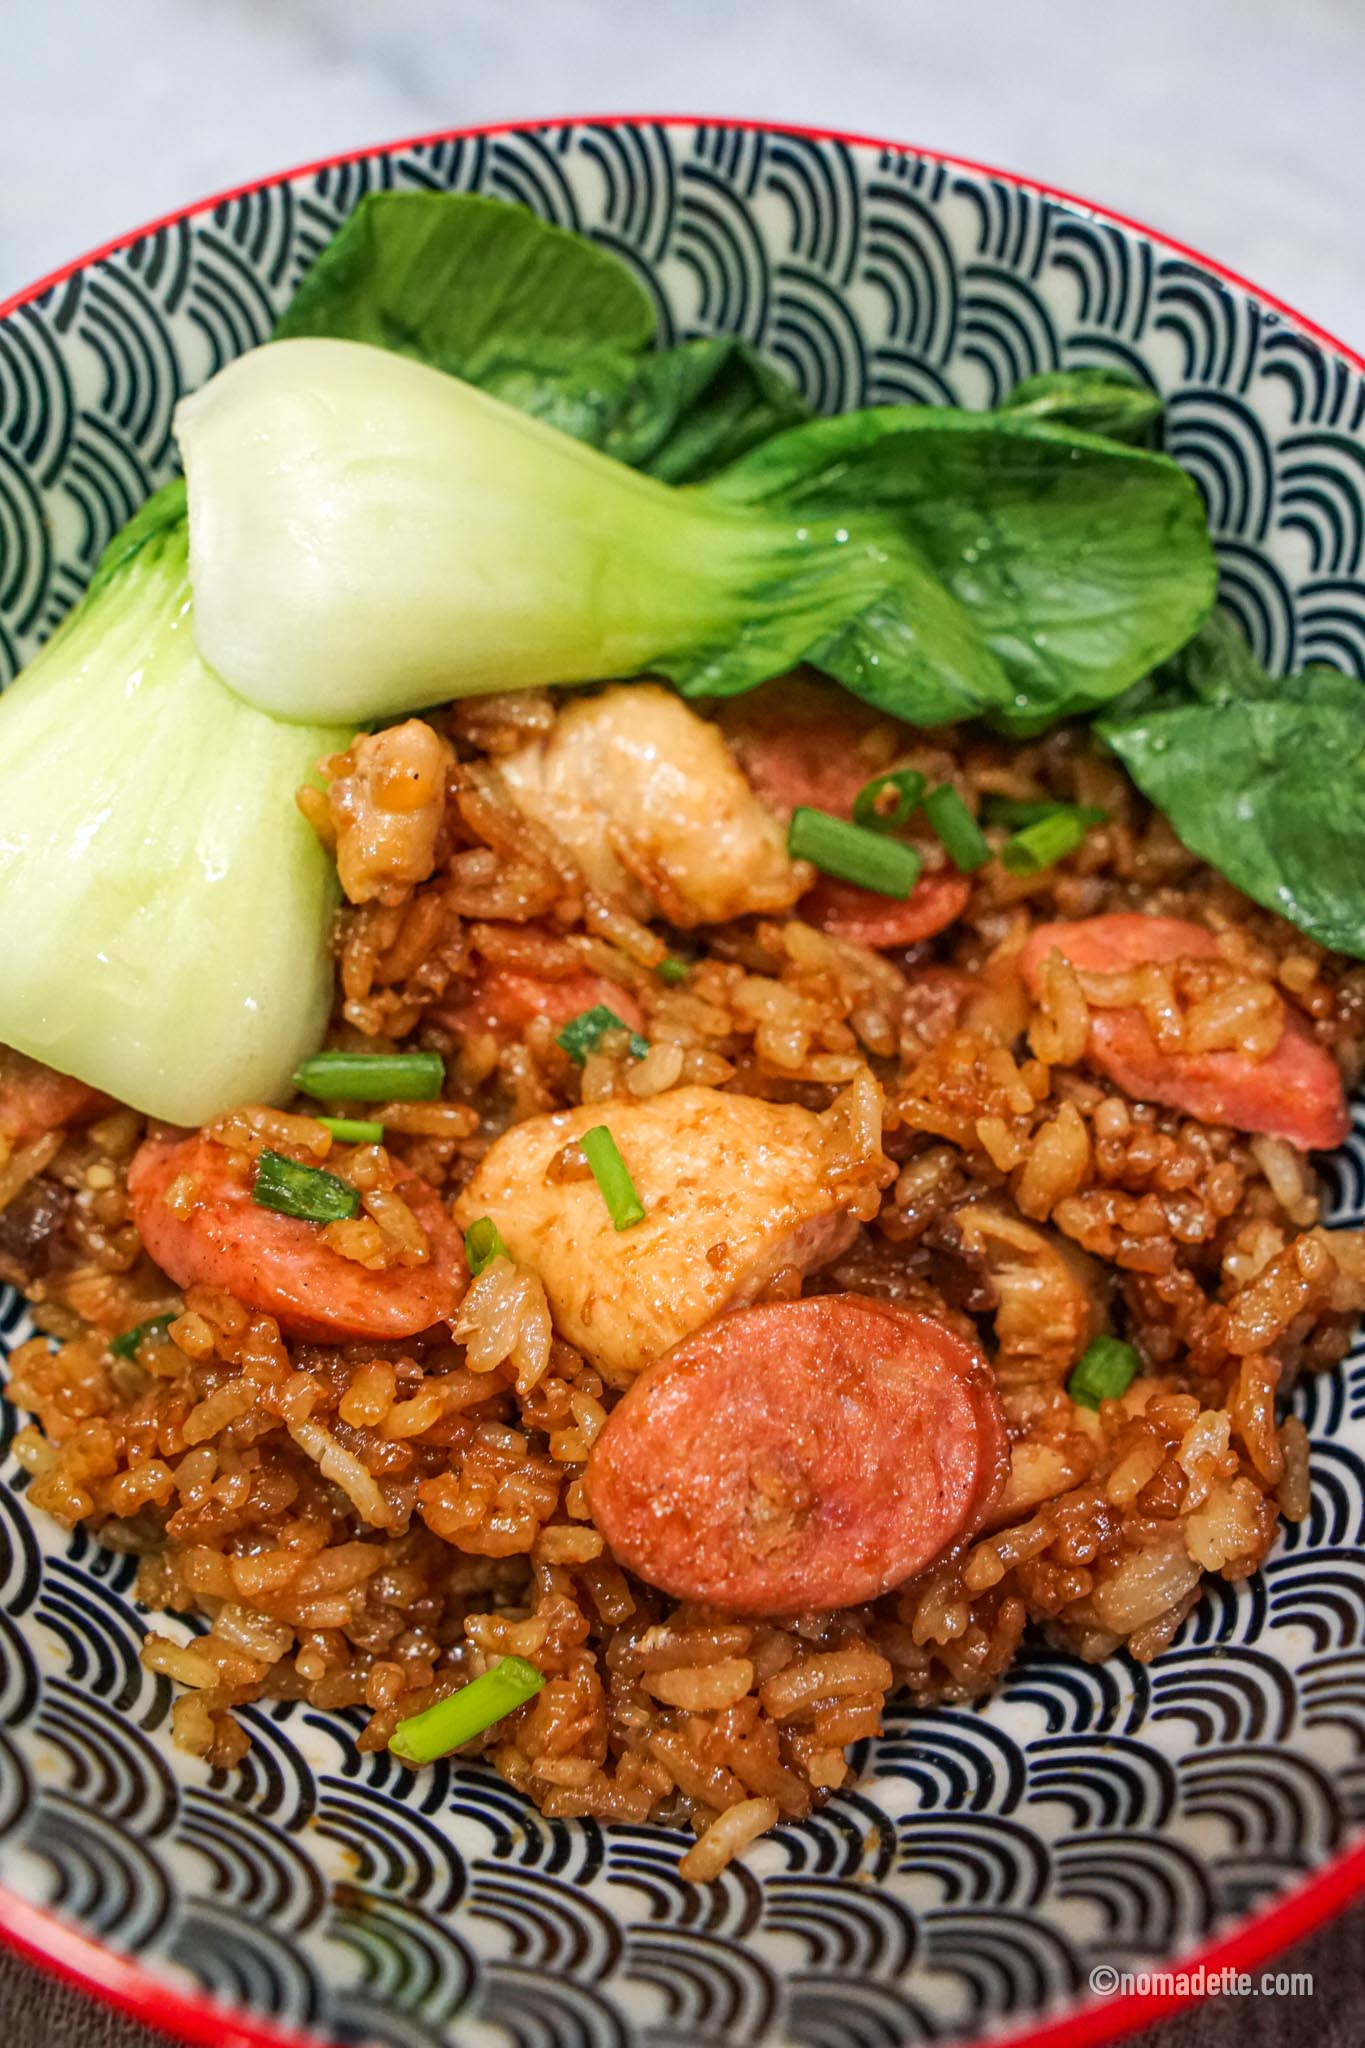 http://nomadette.com/wp-content/uploads/2022/01/How-to-make-claypot-chicken-rice-in-a-rice-cooker.jpg